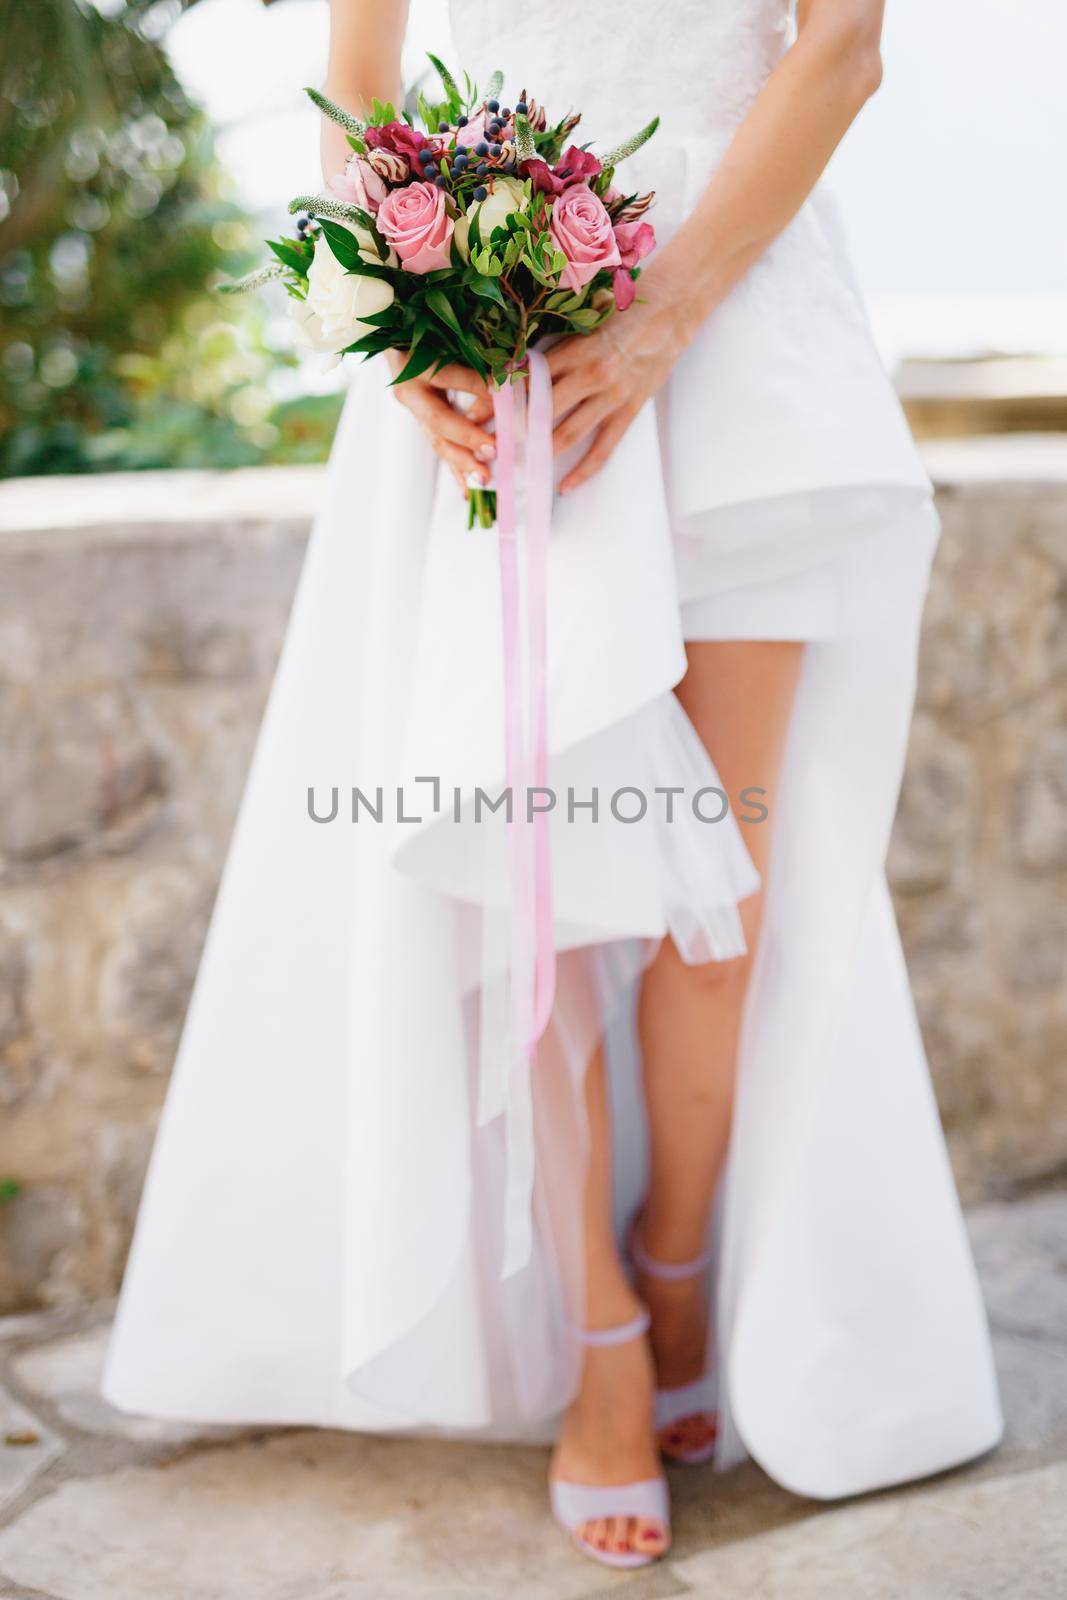 Bride in a stylish dress with open legs holding a wedding bouquet with roses, veronica, viburnum and boxwood in her hands, close-up . High quality photo